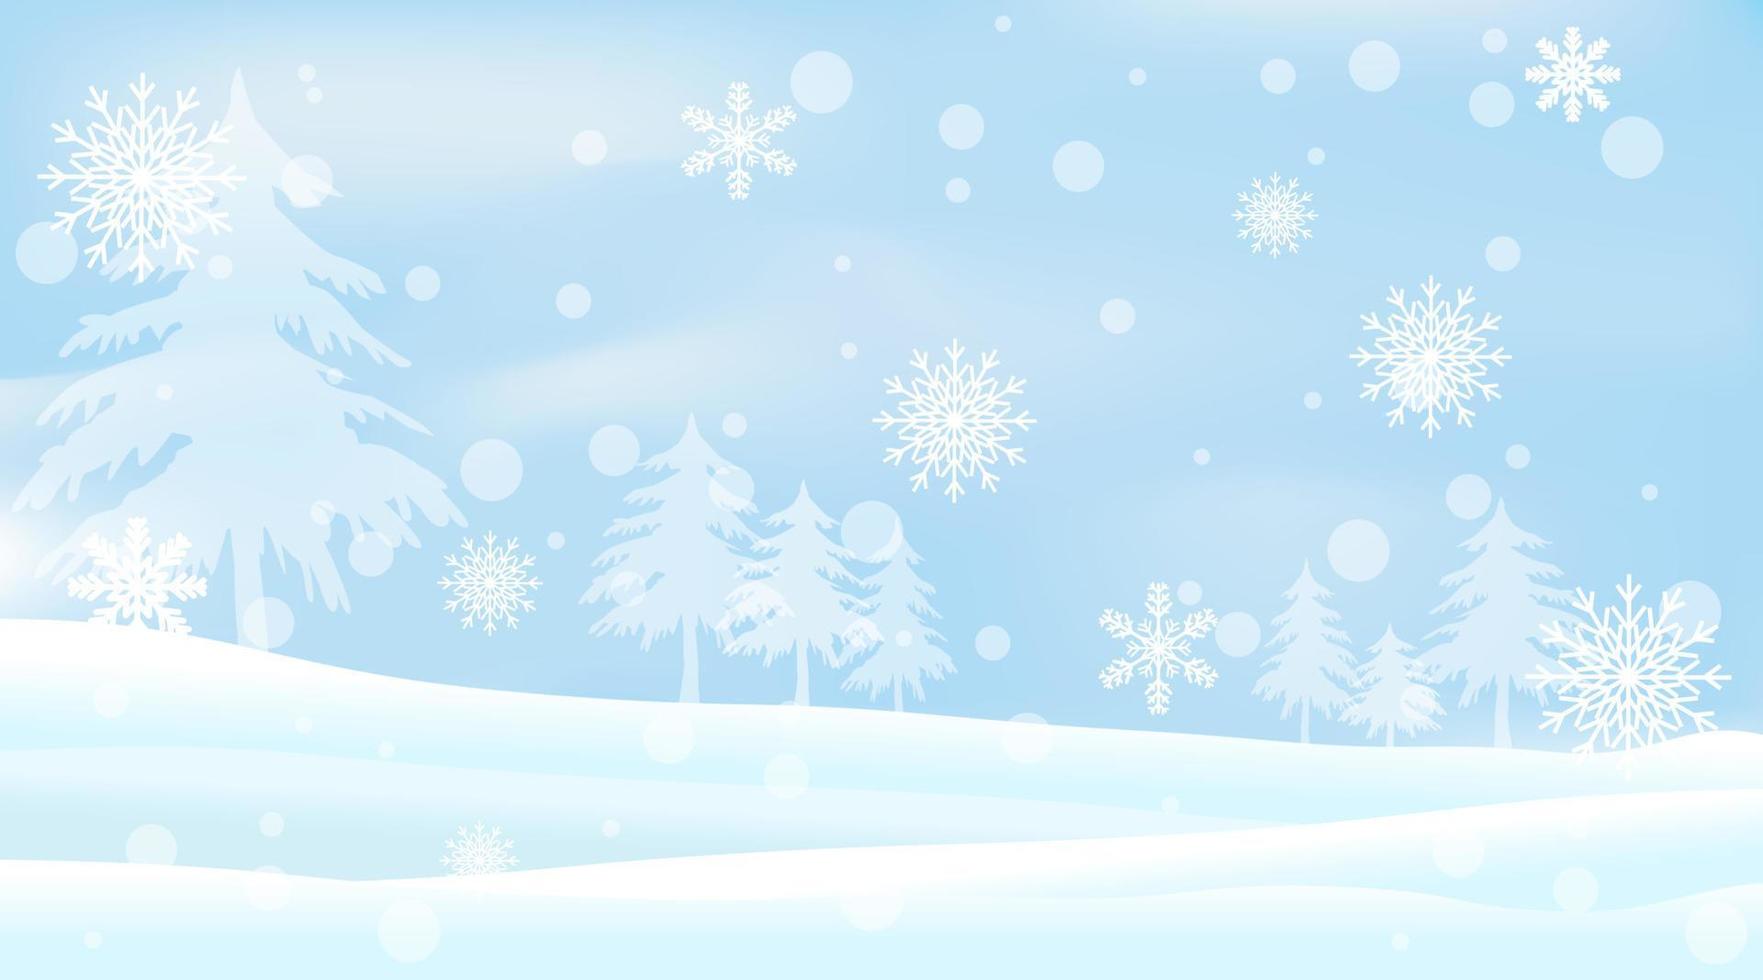 Winter holiday snowy and snowflake and blue sky background. Christmas season illustration. vector